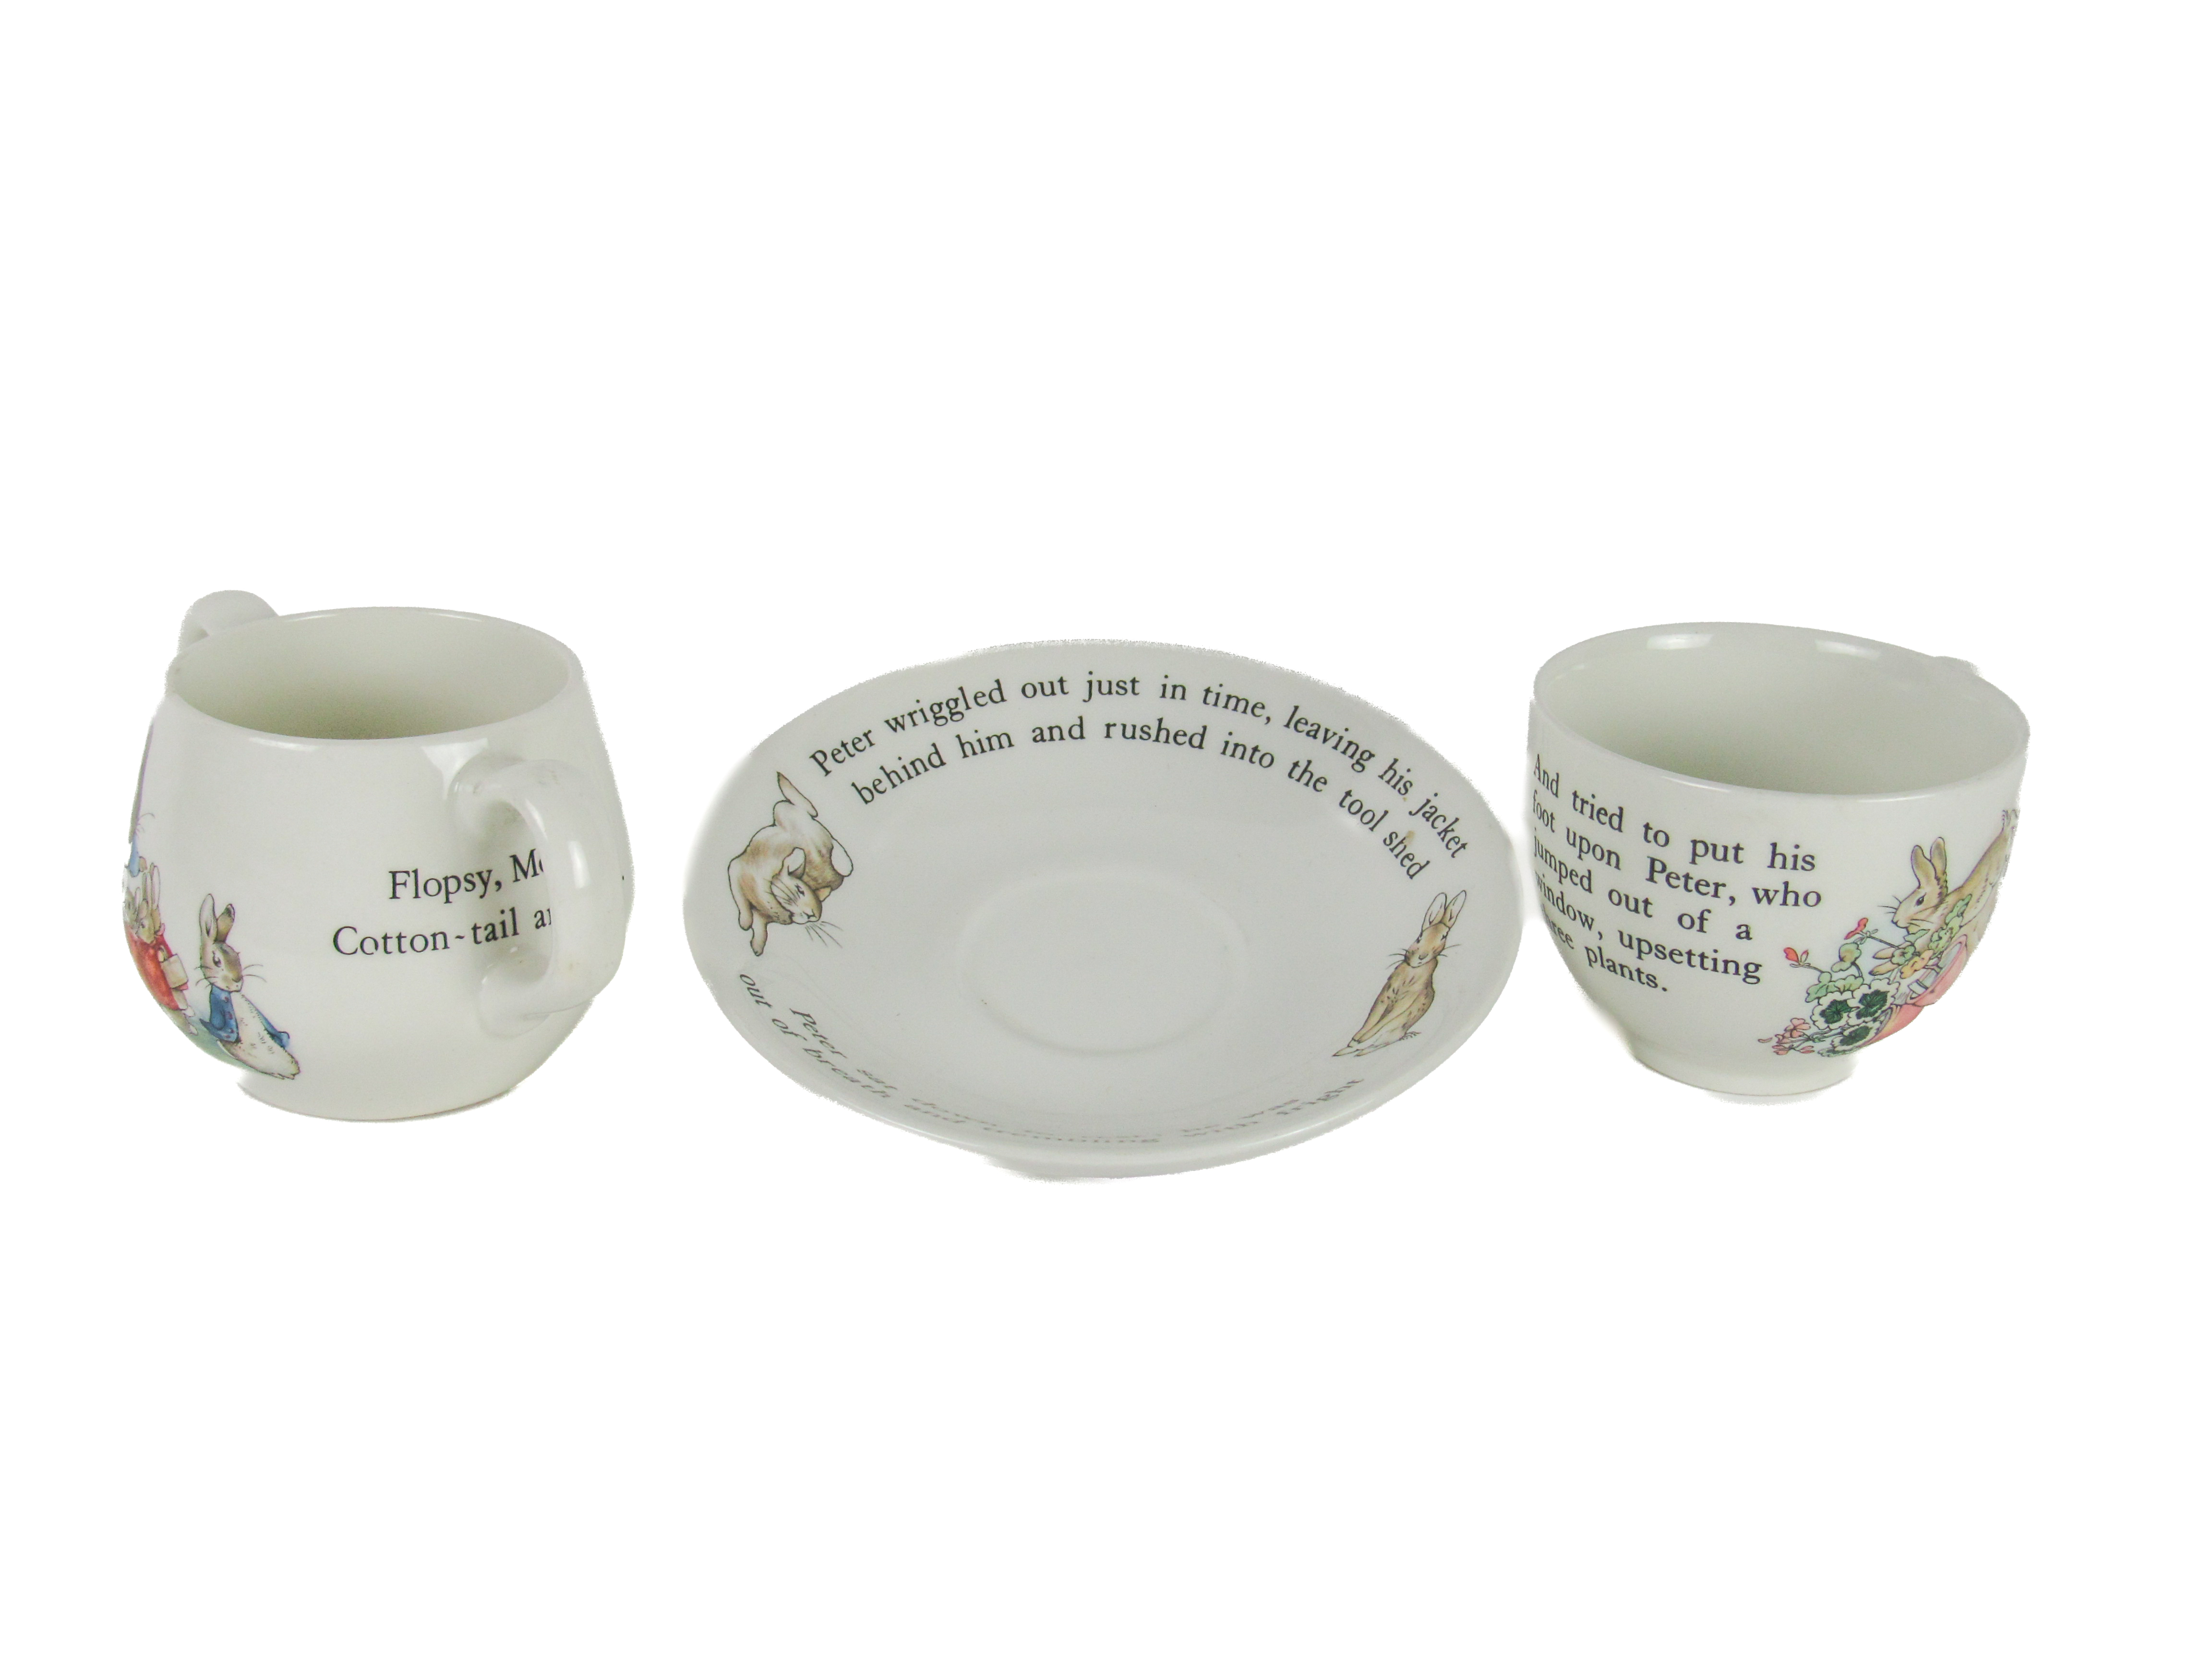 A Beatrix Potter 'Peter Rabbit' design Cup and Saucer, together with a Child's two handled Mug by